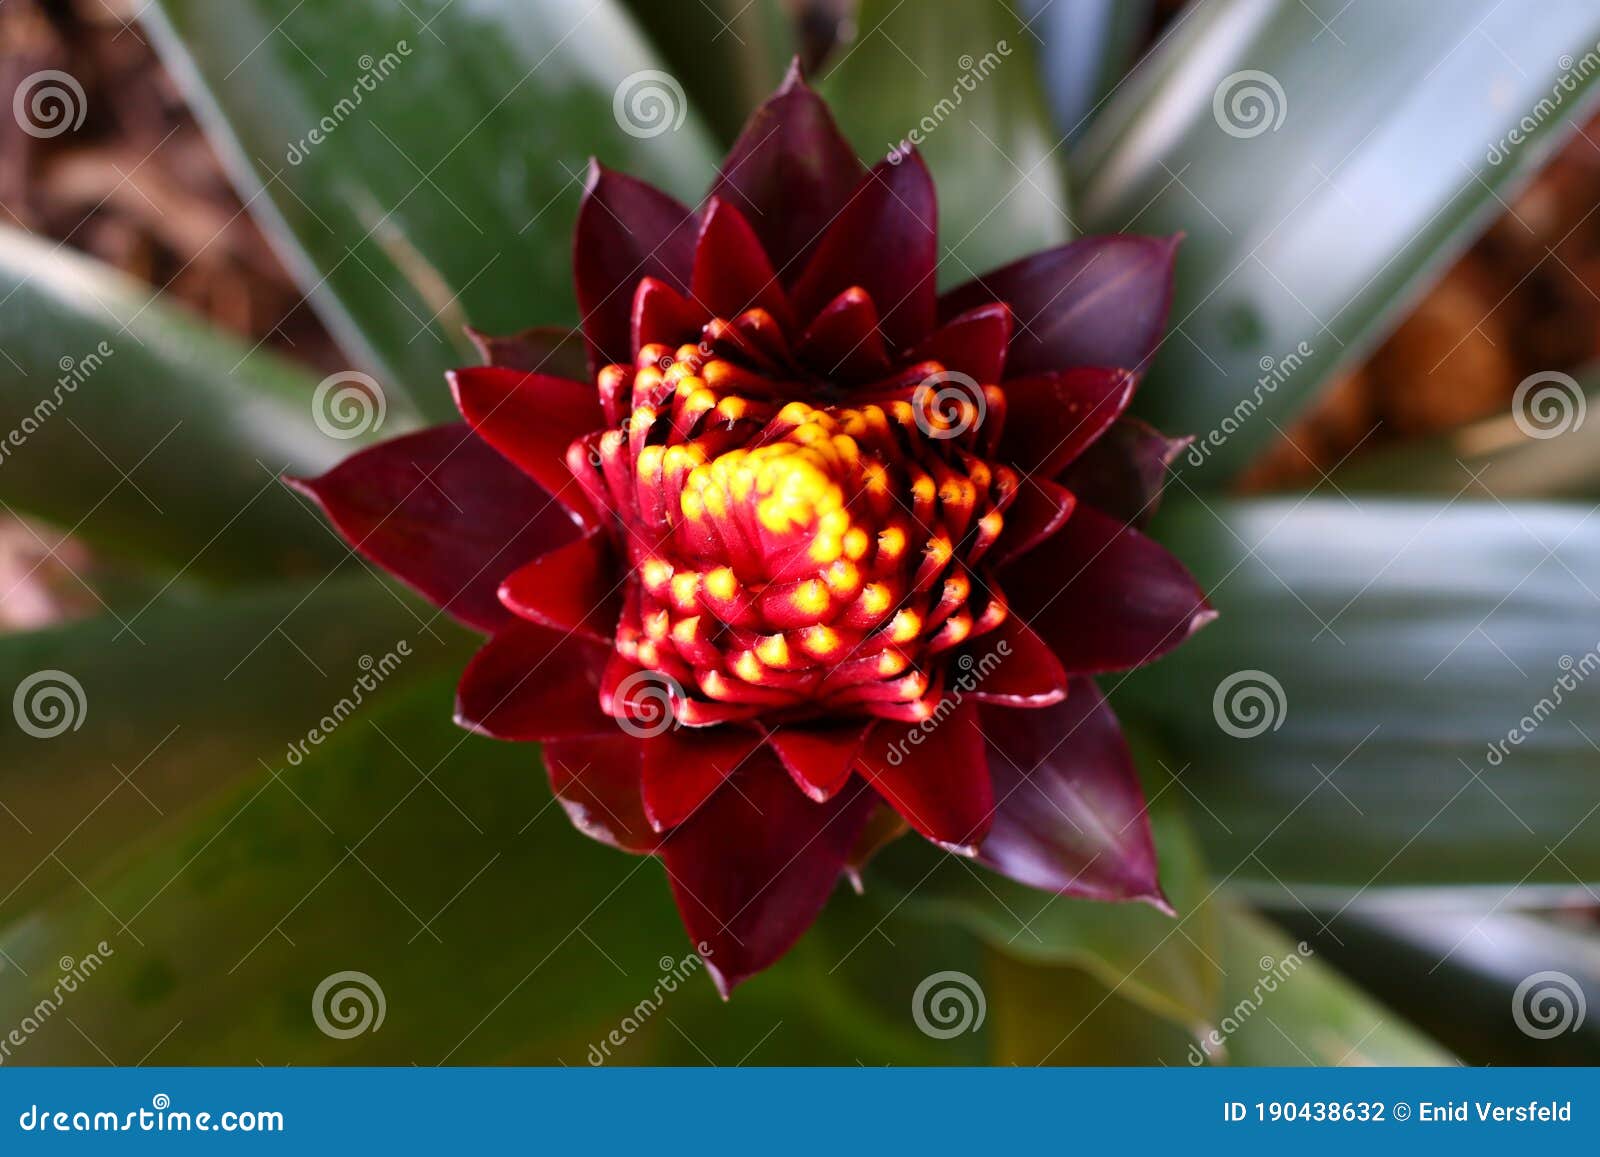 the maroon, red and yellow guzmania flower in the process of opening.